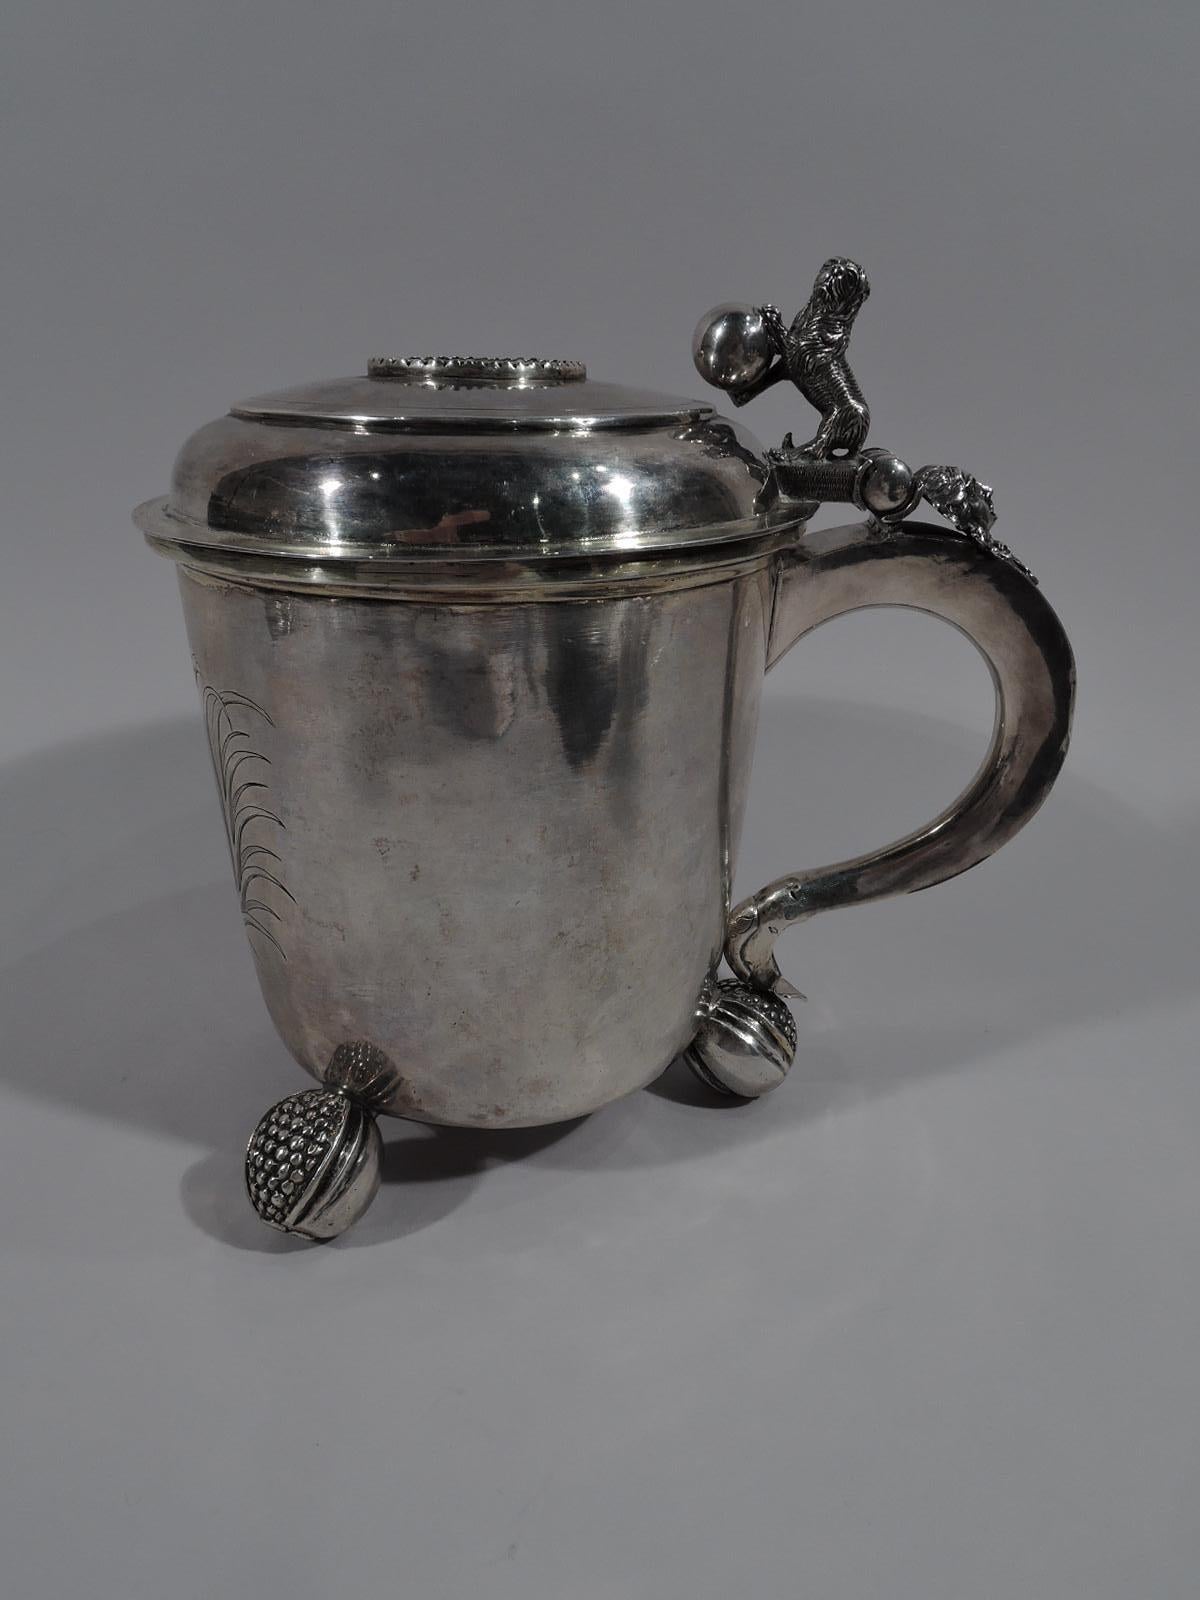 Fine quality Danish Baroque silver tankard, 1688. Drum form with 3 splayed split-pomegranate supports. Engraved armorial. Cover hinged and inset with gilt coin issued during reign of Christian IV, (1588-1648). Scroll handle with cast lion rampant